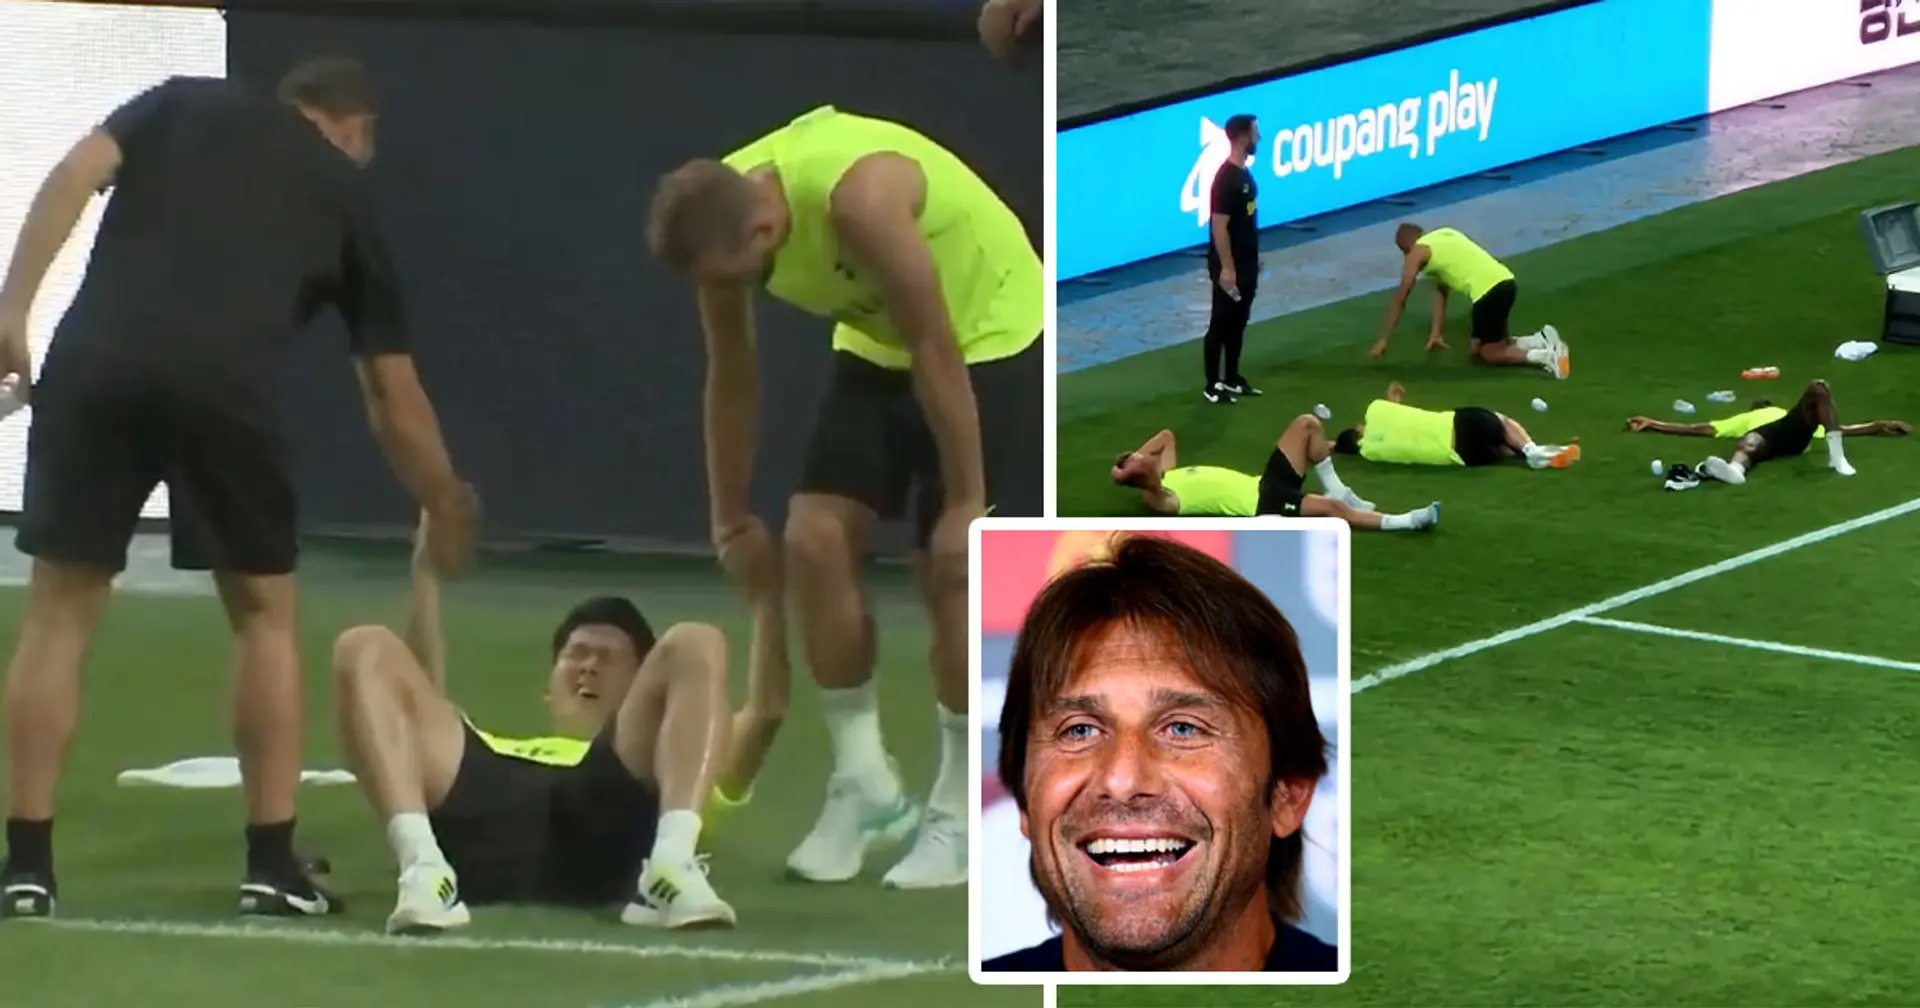 Son Heung-min struggles to get up after Tottenham's brutal training sessions under Antonio Conte